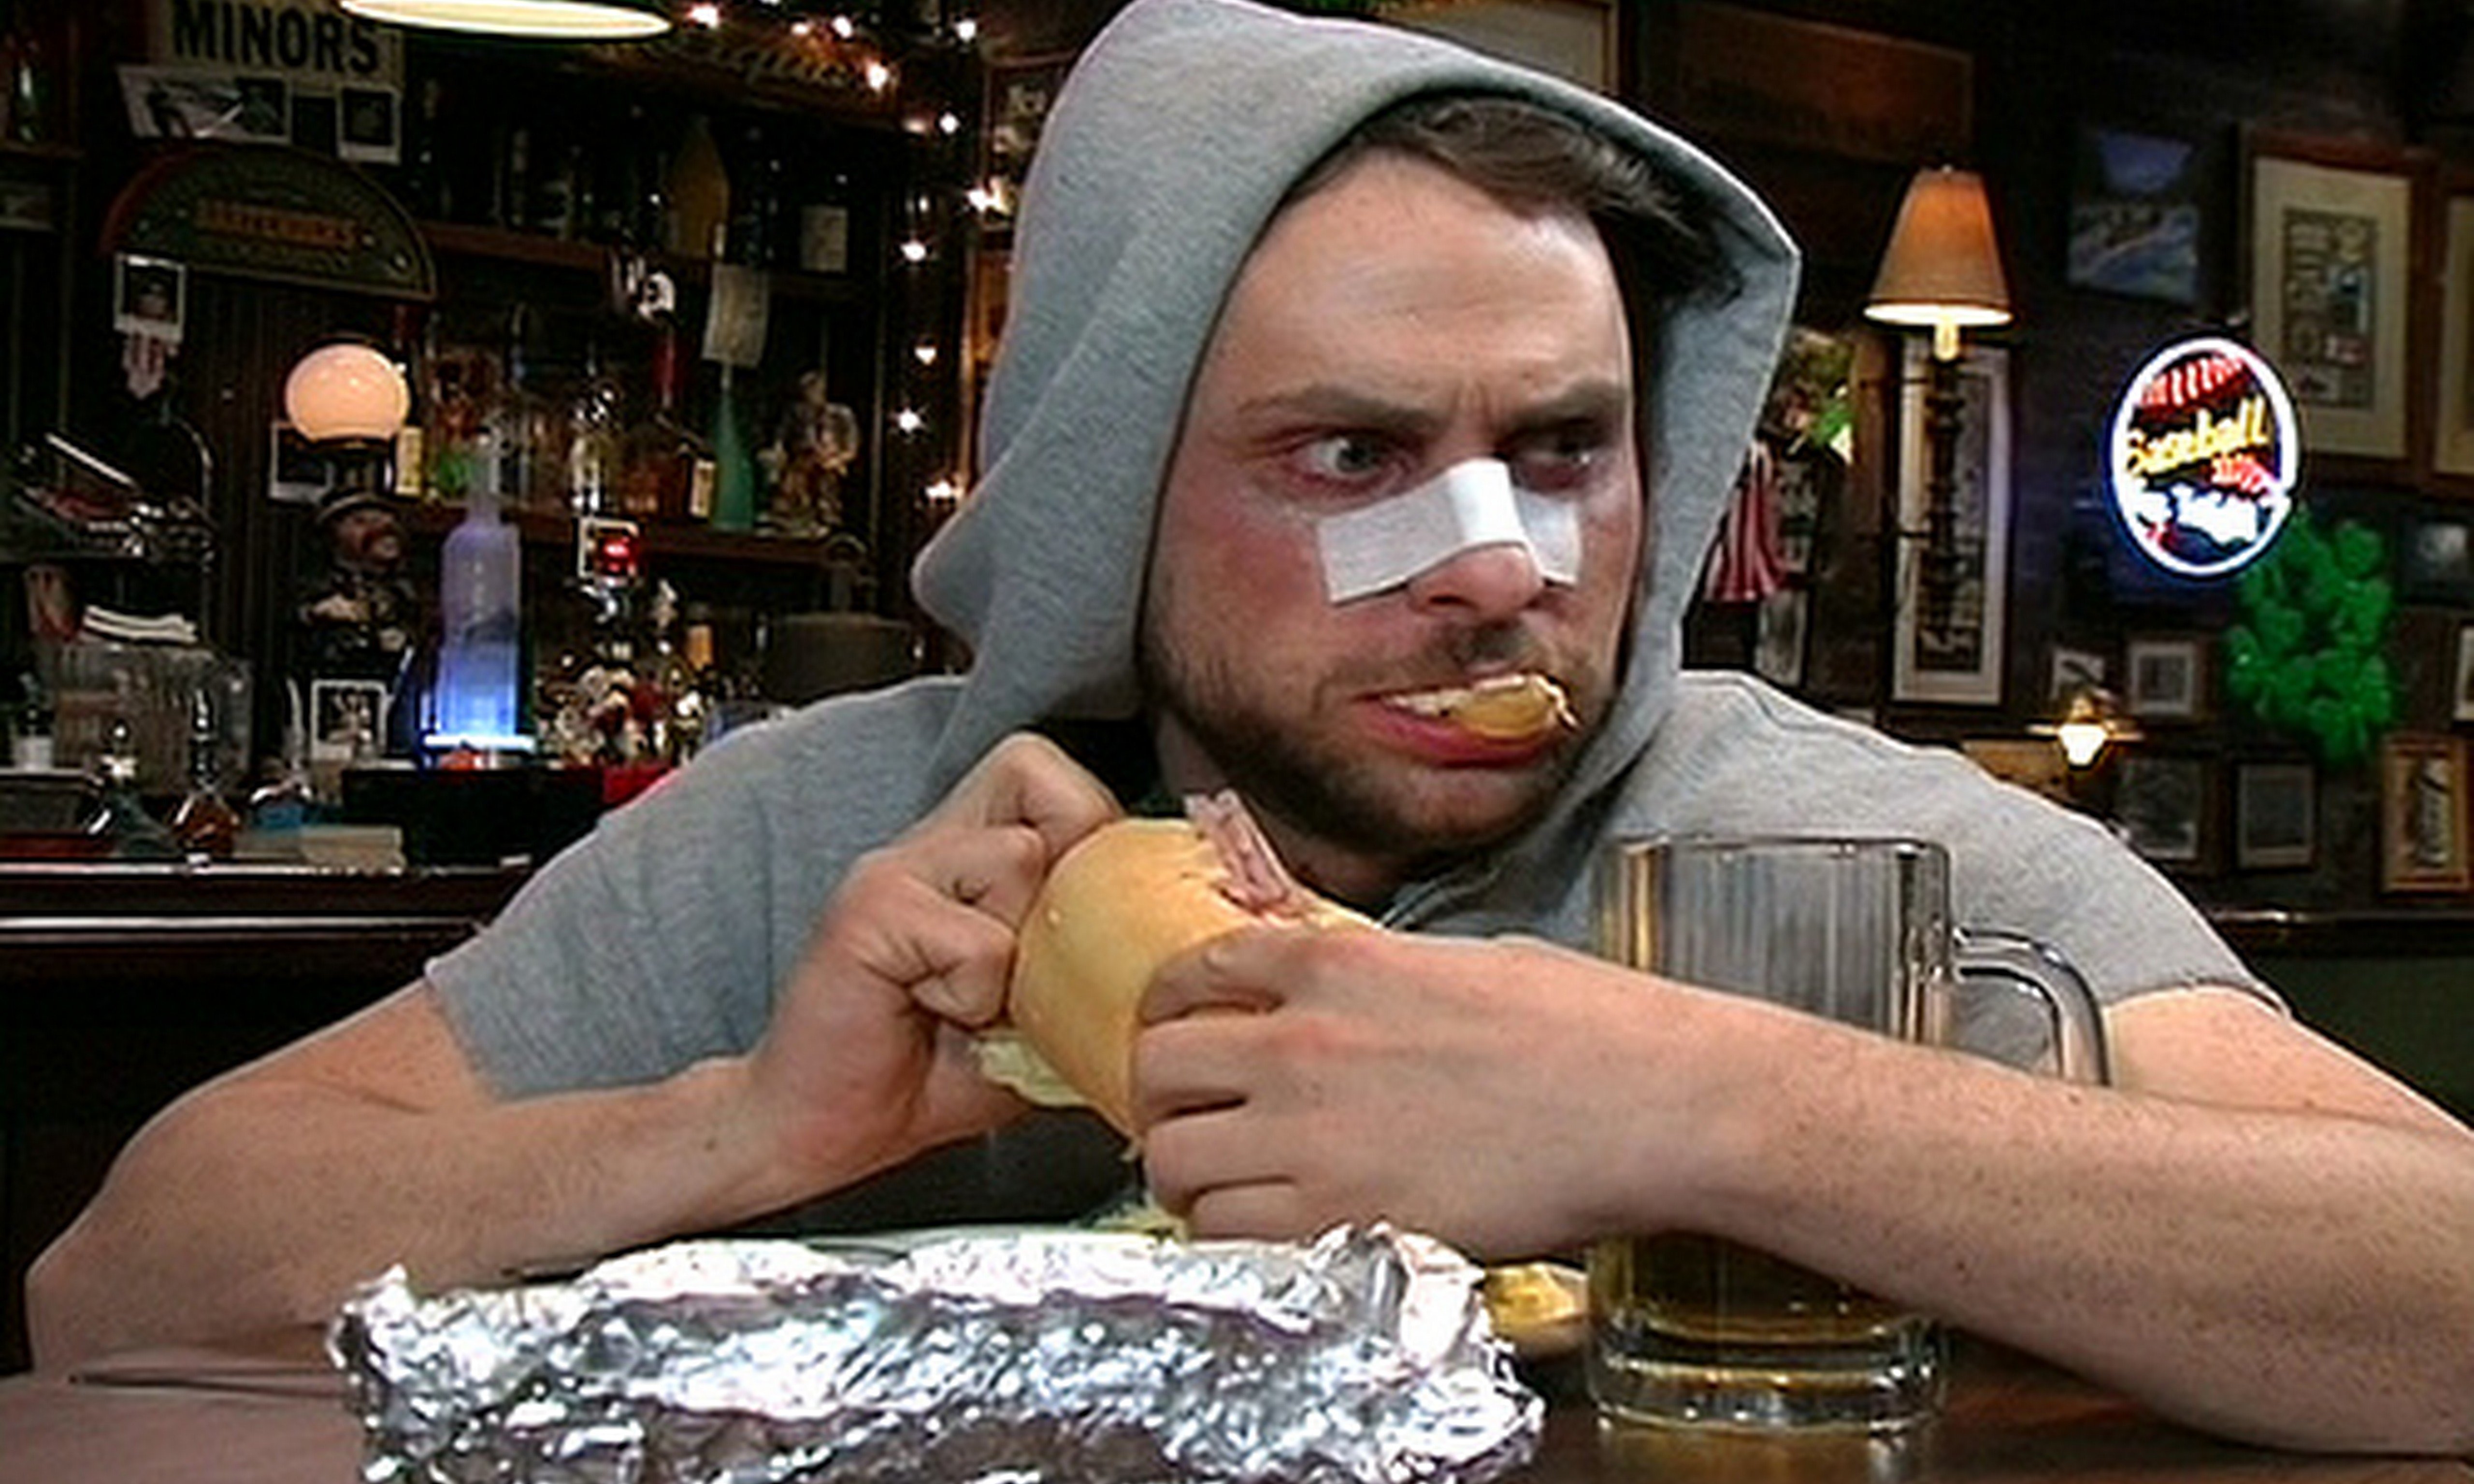 Its Always Sunny In Philadelphia comedy sitcom television series